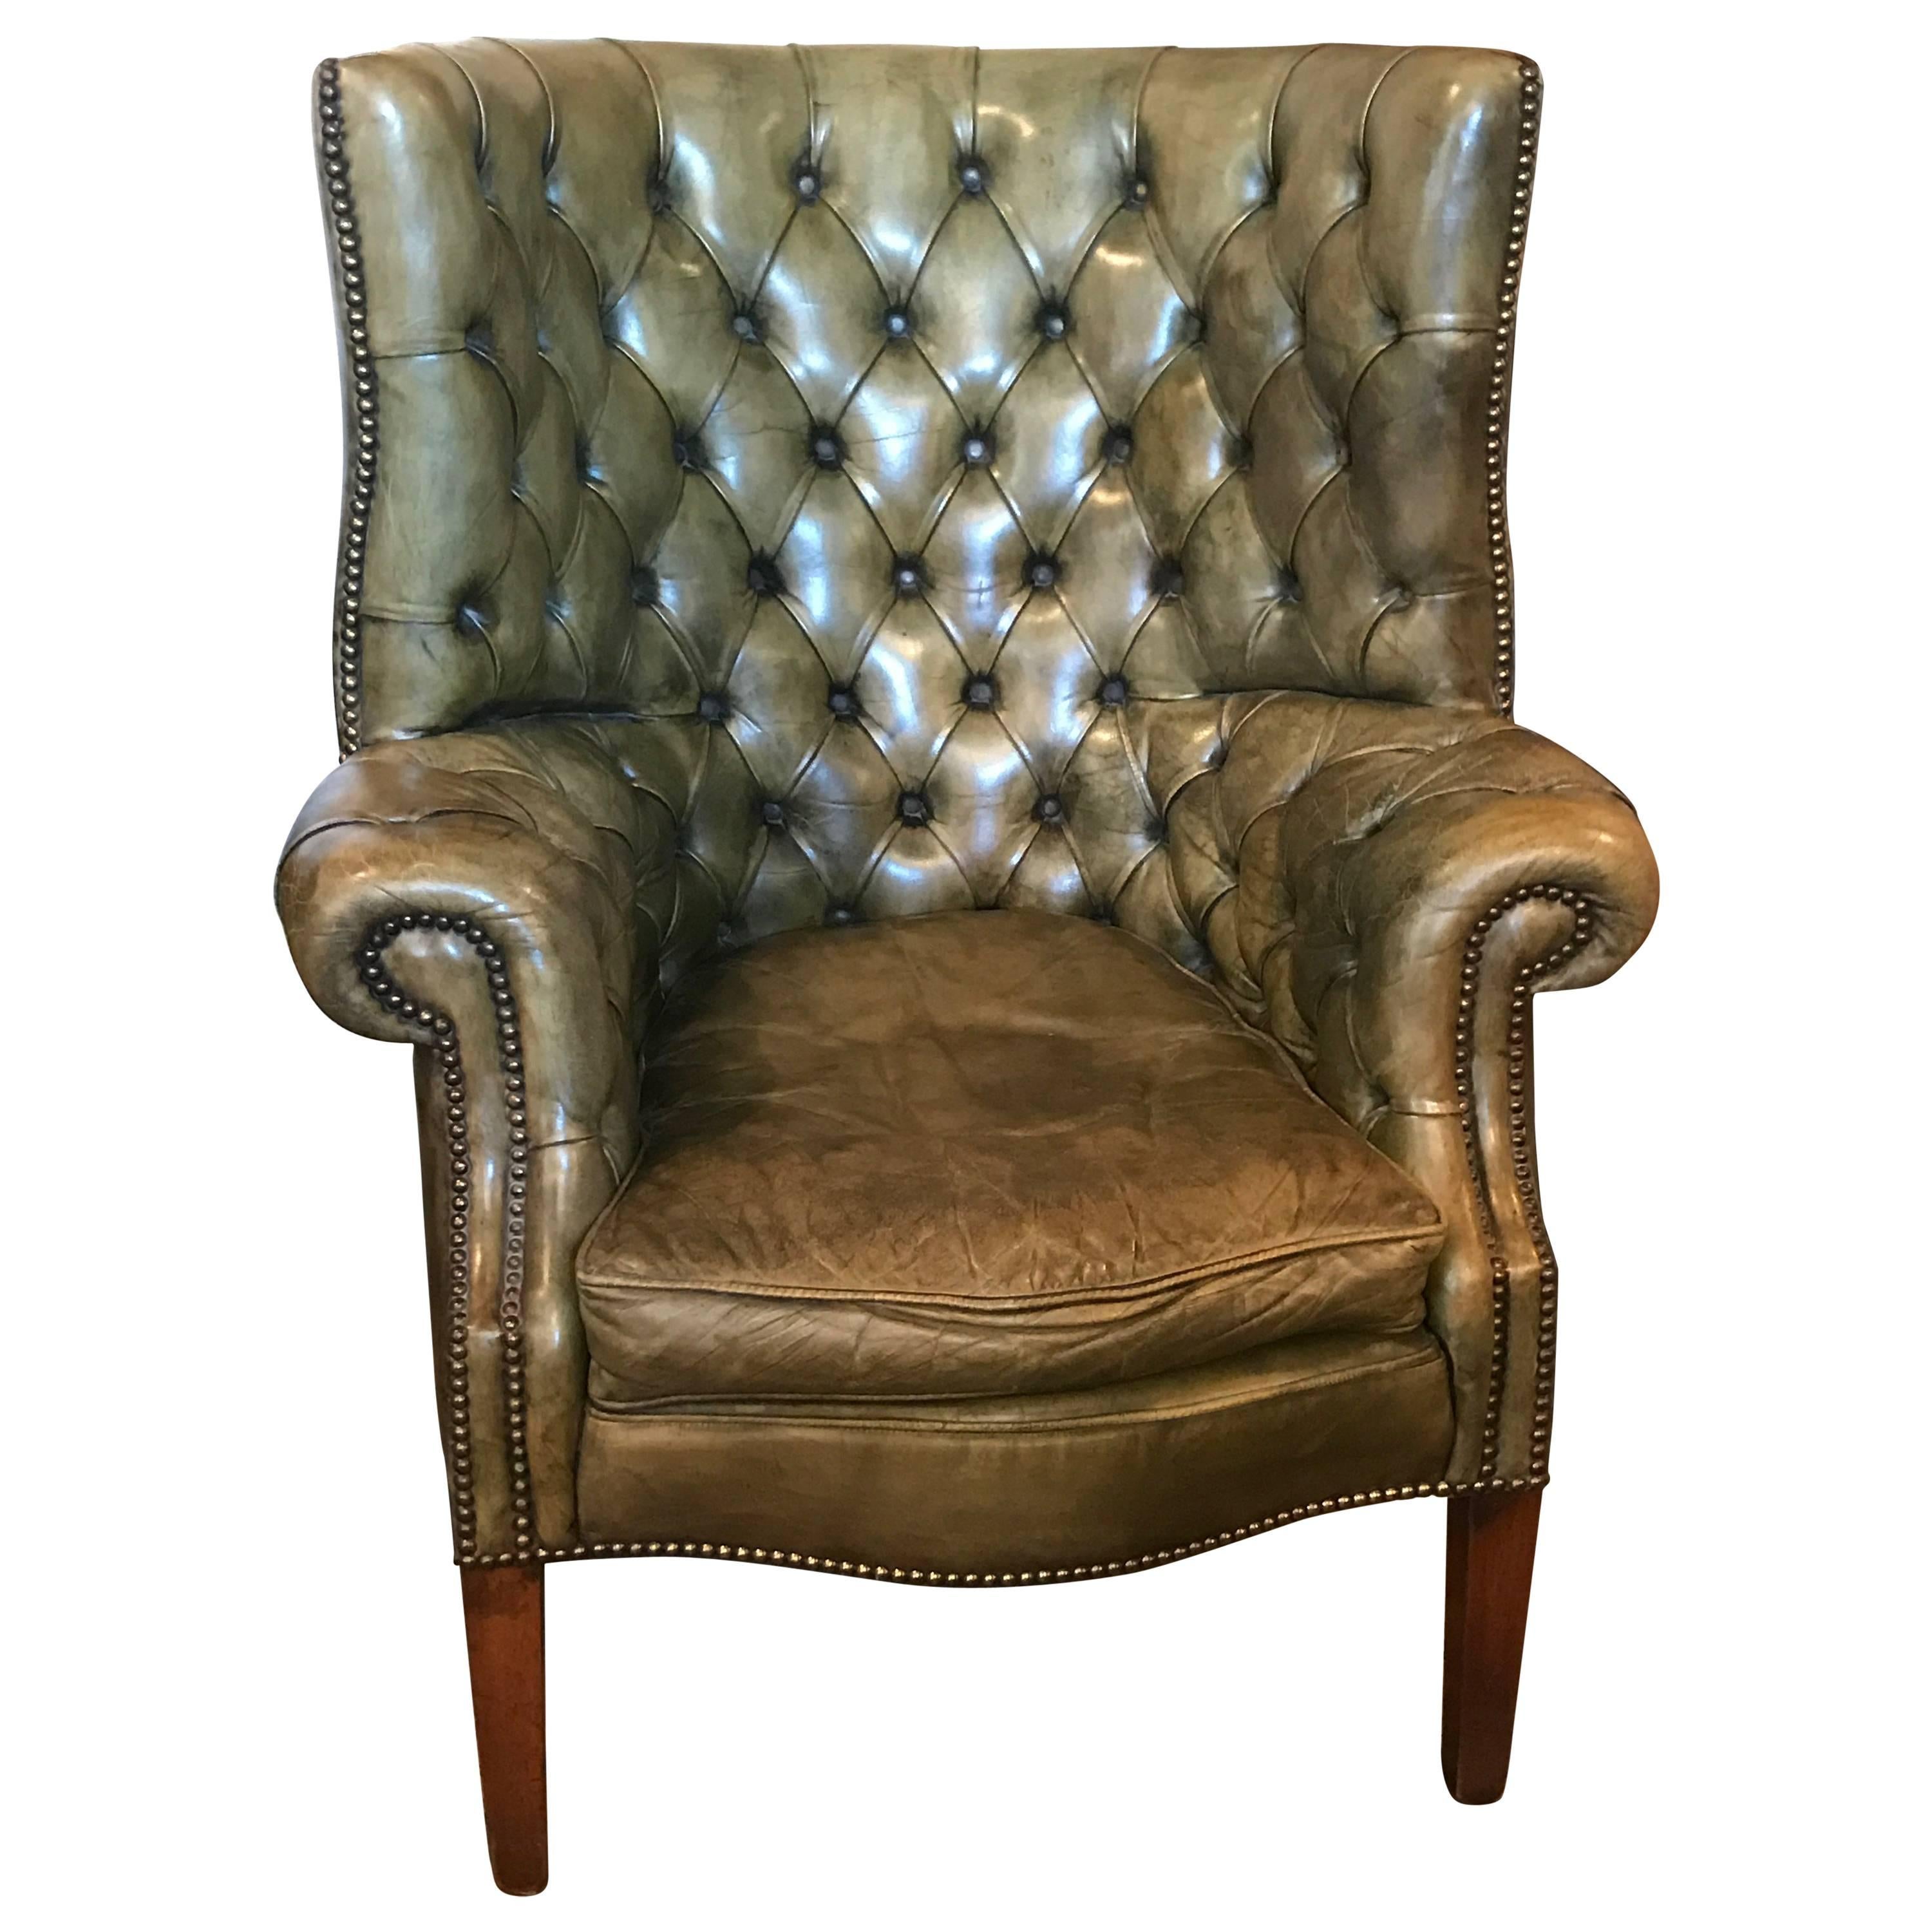 Mid-20th Century English Leather Barrel Wing Chair